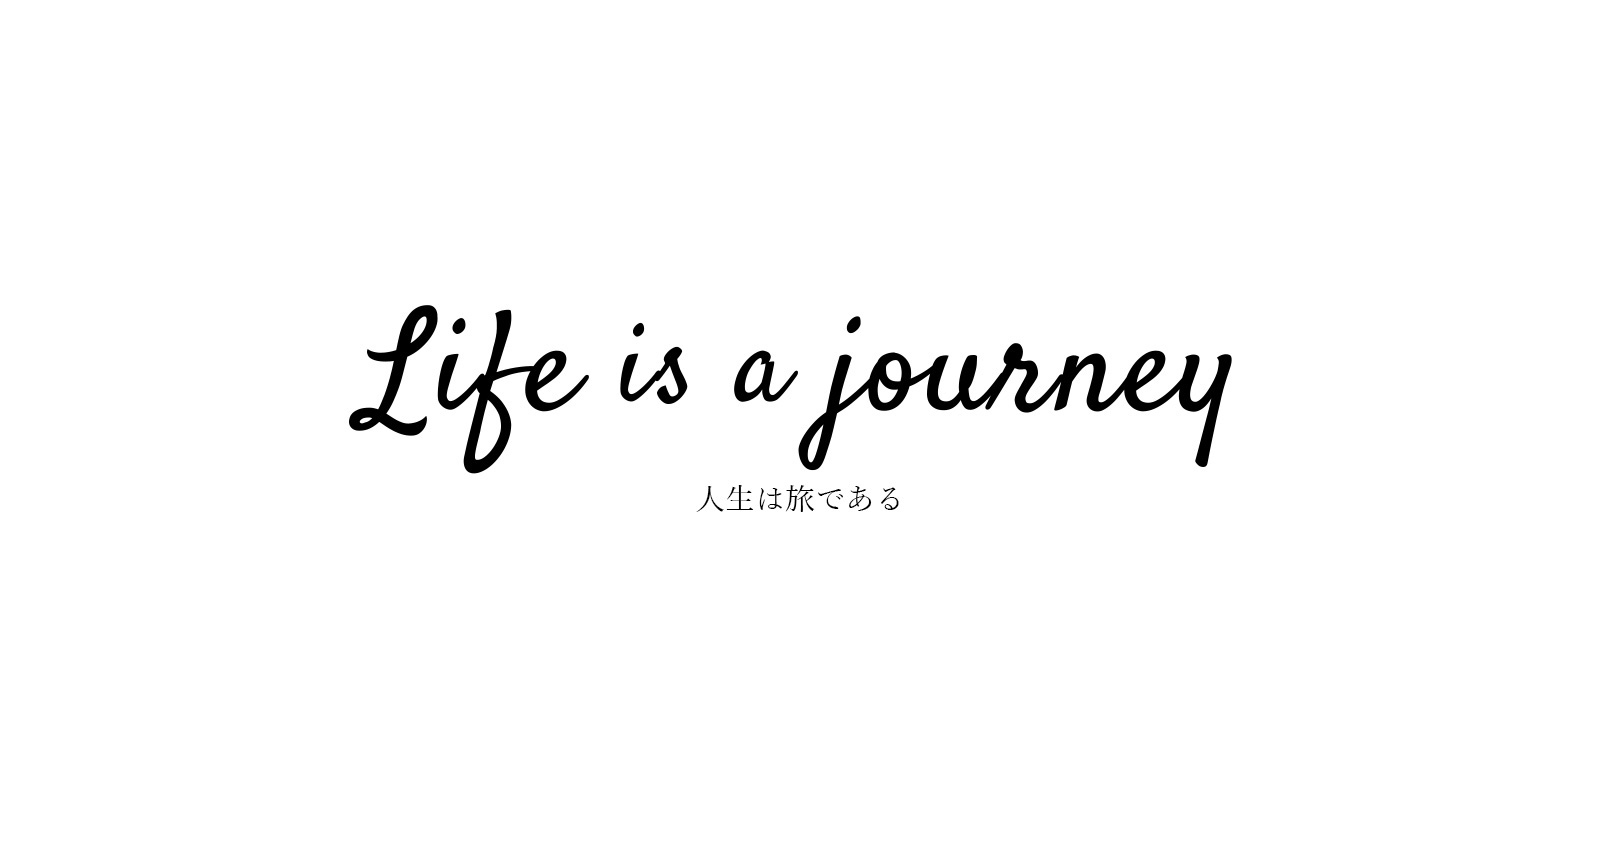 Life is journey 人生は旅である